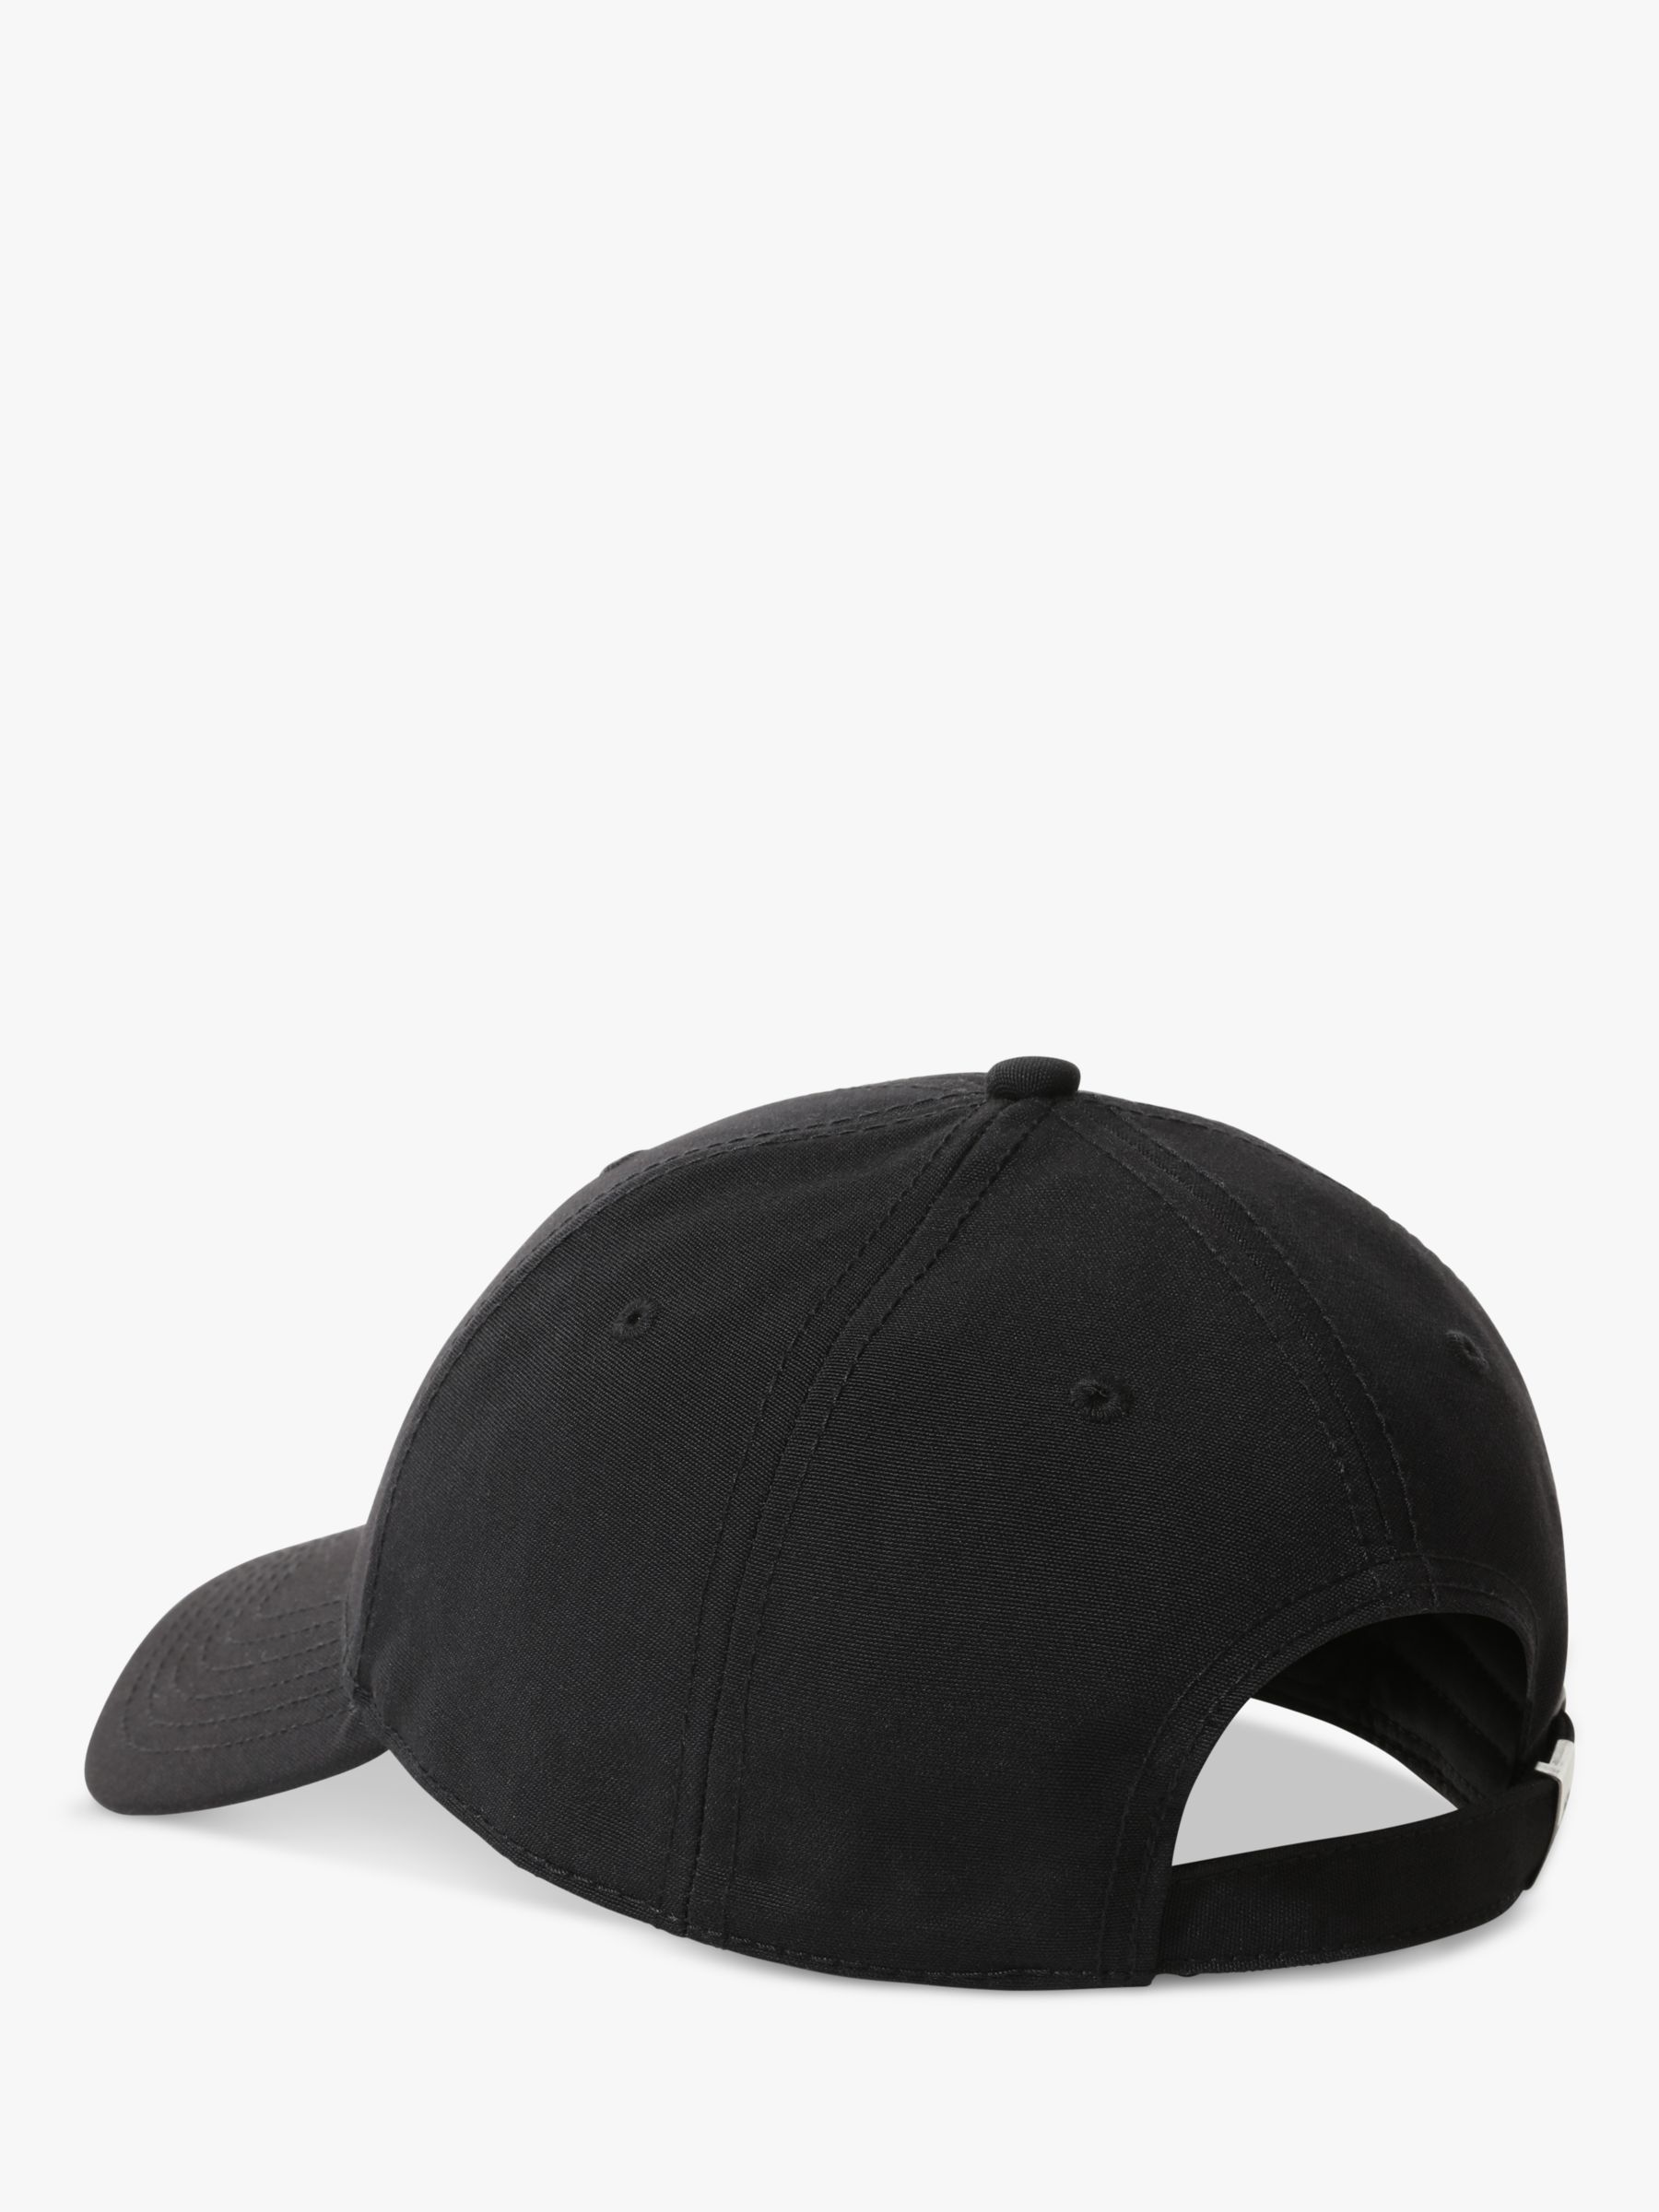 Buy The North Face 66 Classic Baseball Cap Online at johnlewis.com